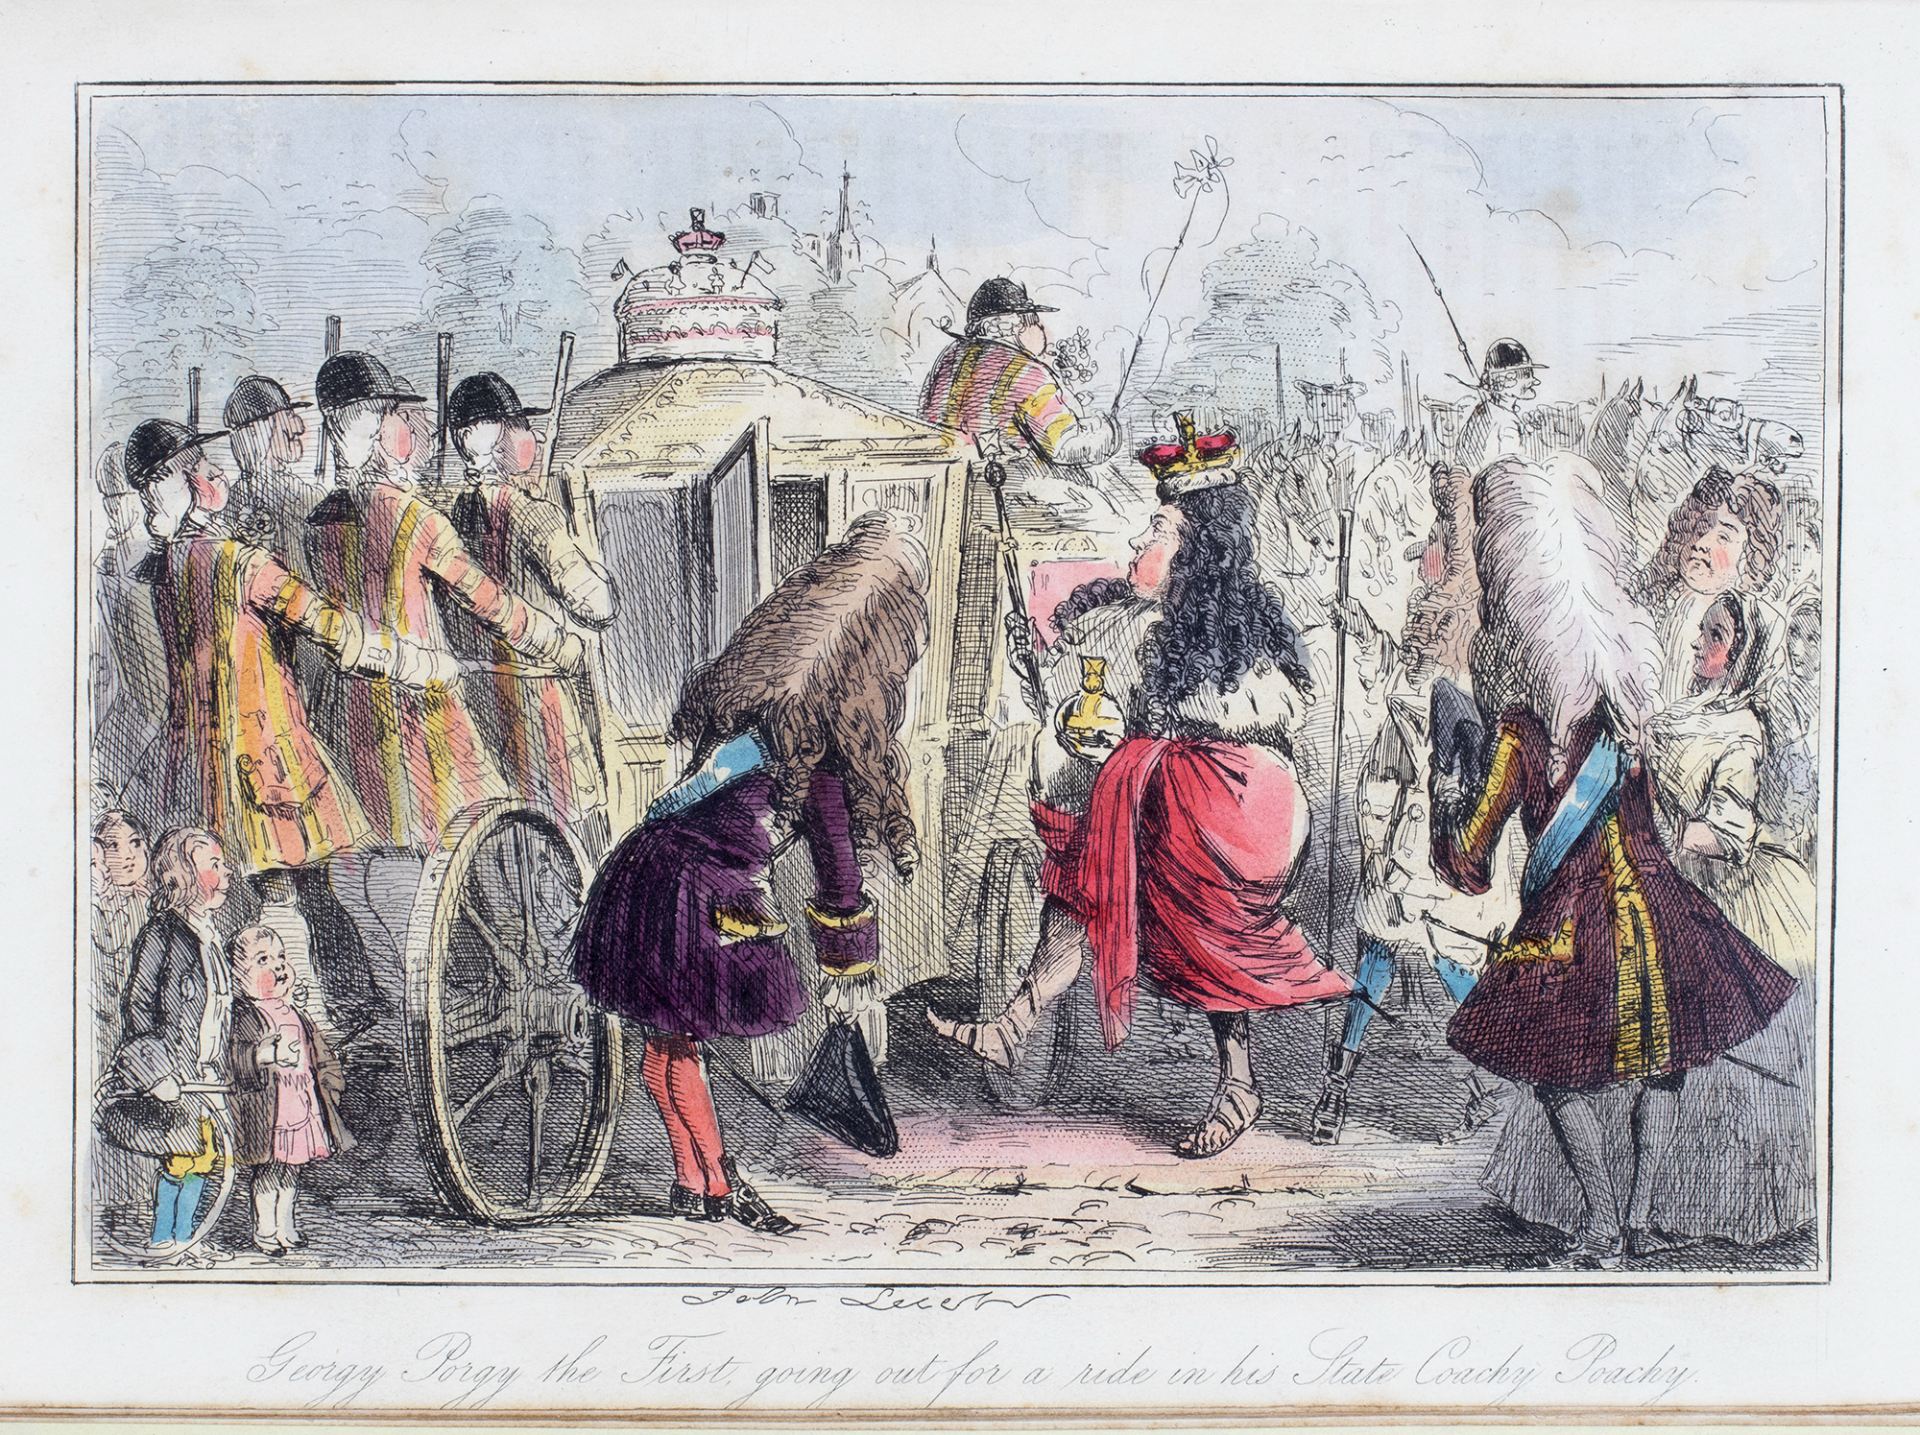 'Georgy Porgy the First going out for a ride in his State Coachy Poachy' from 'The Comic History of England'.